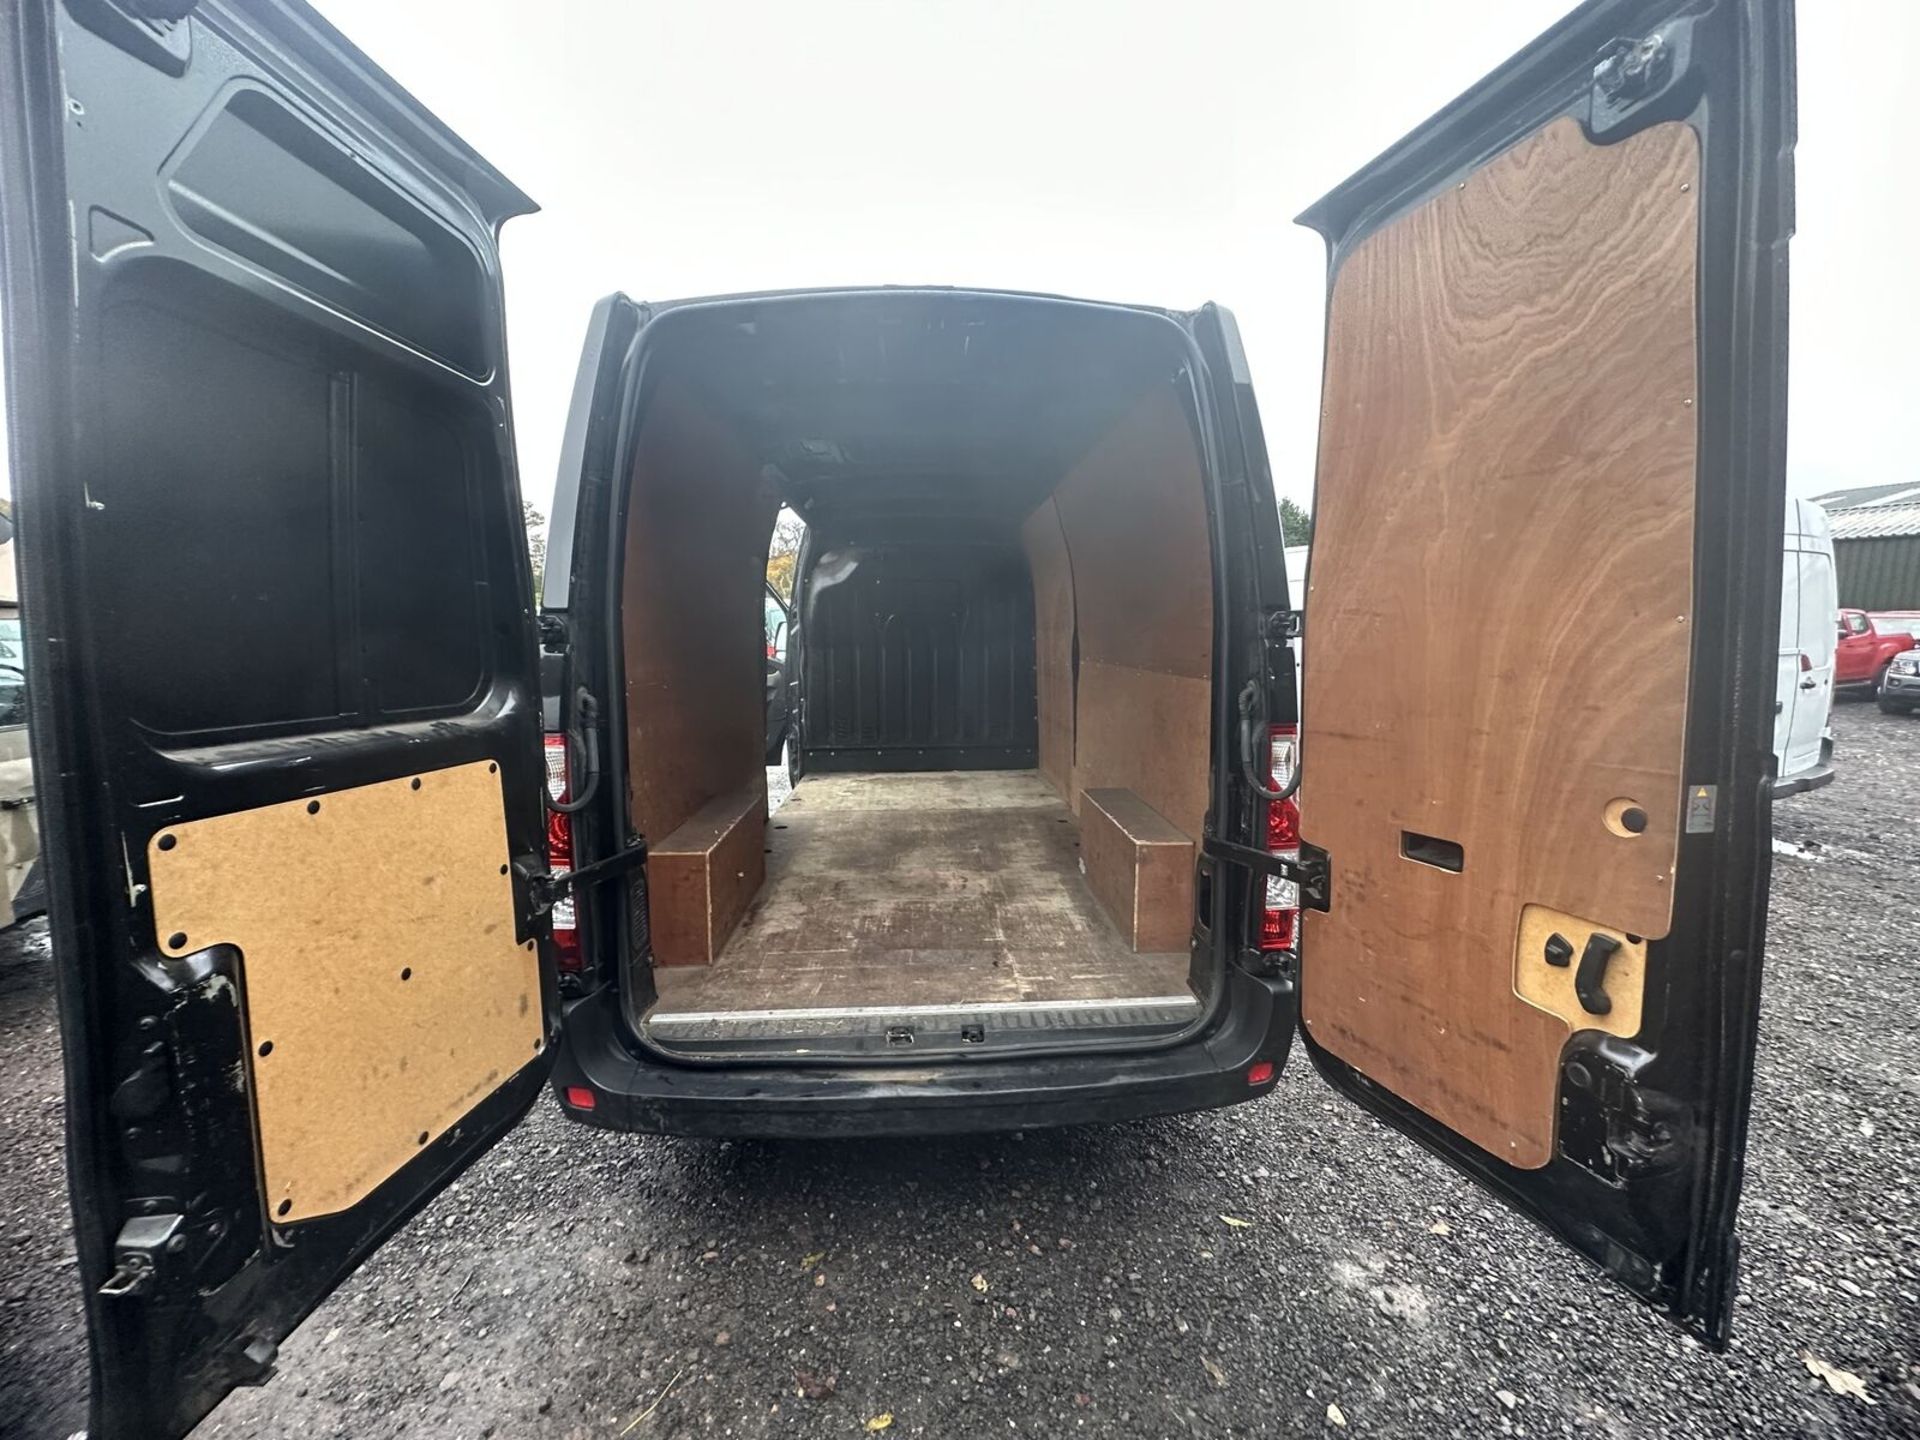 MOVANO PANEL VAN: 2018 VAUXHALL, RELIABLE RUN, CLEAR HISTORY - NO VAT ON HAMMER - Image 11 of 15